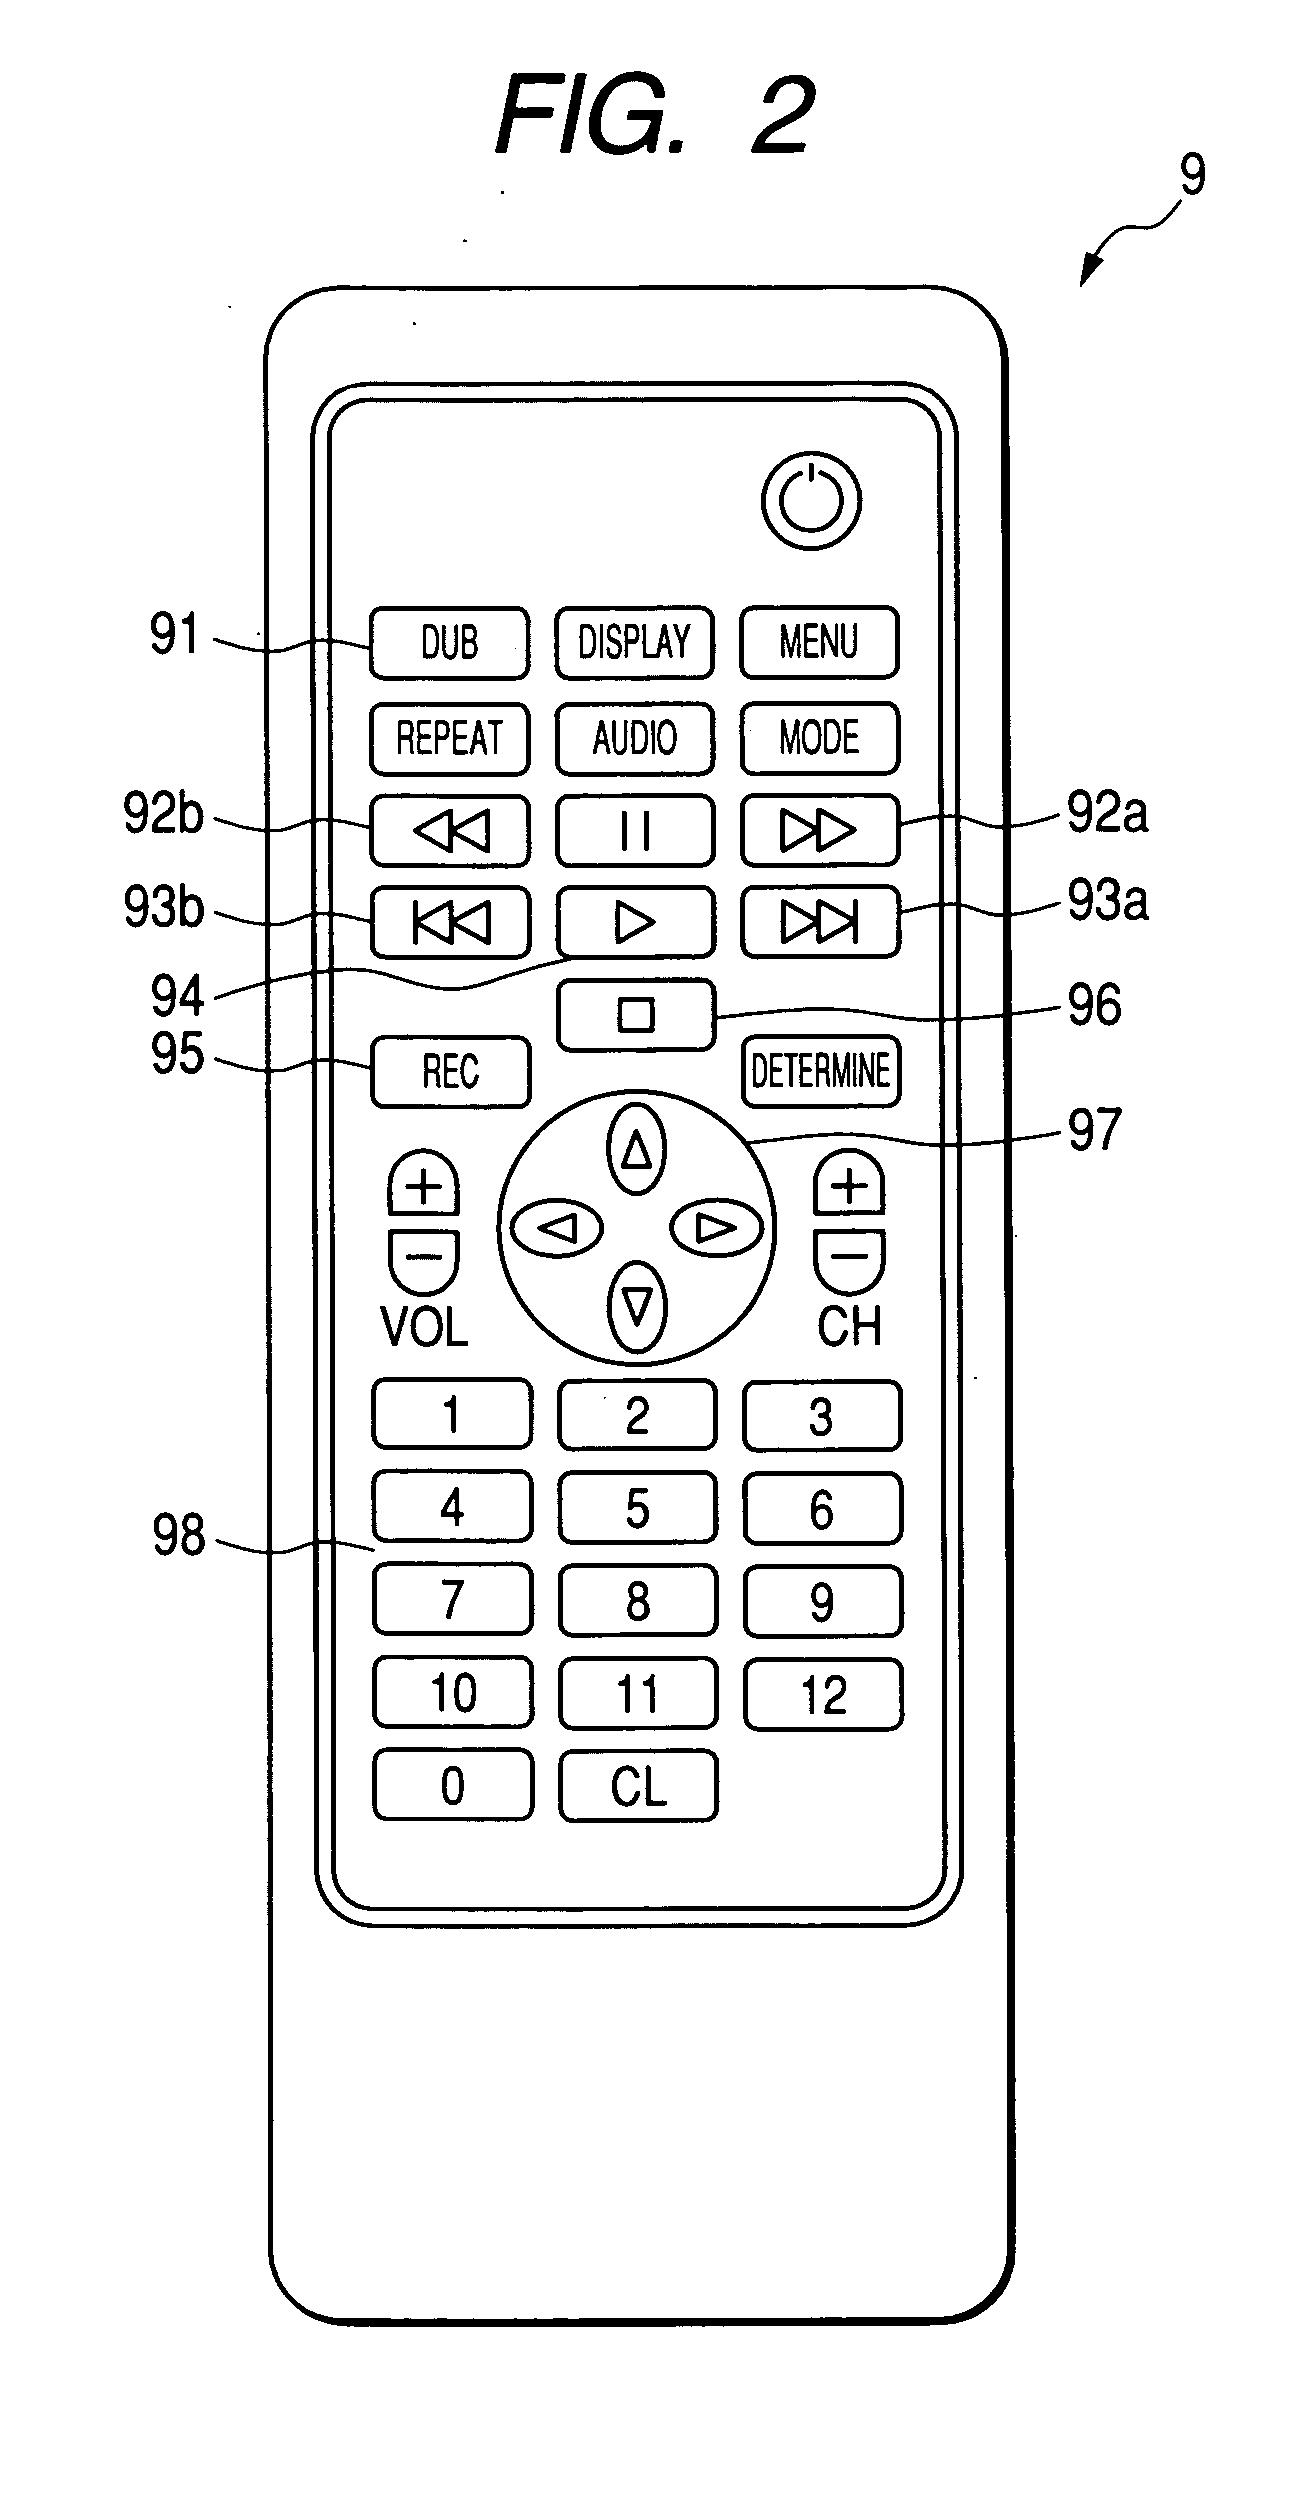 Hard disk recorder and video record apparatus